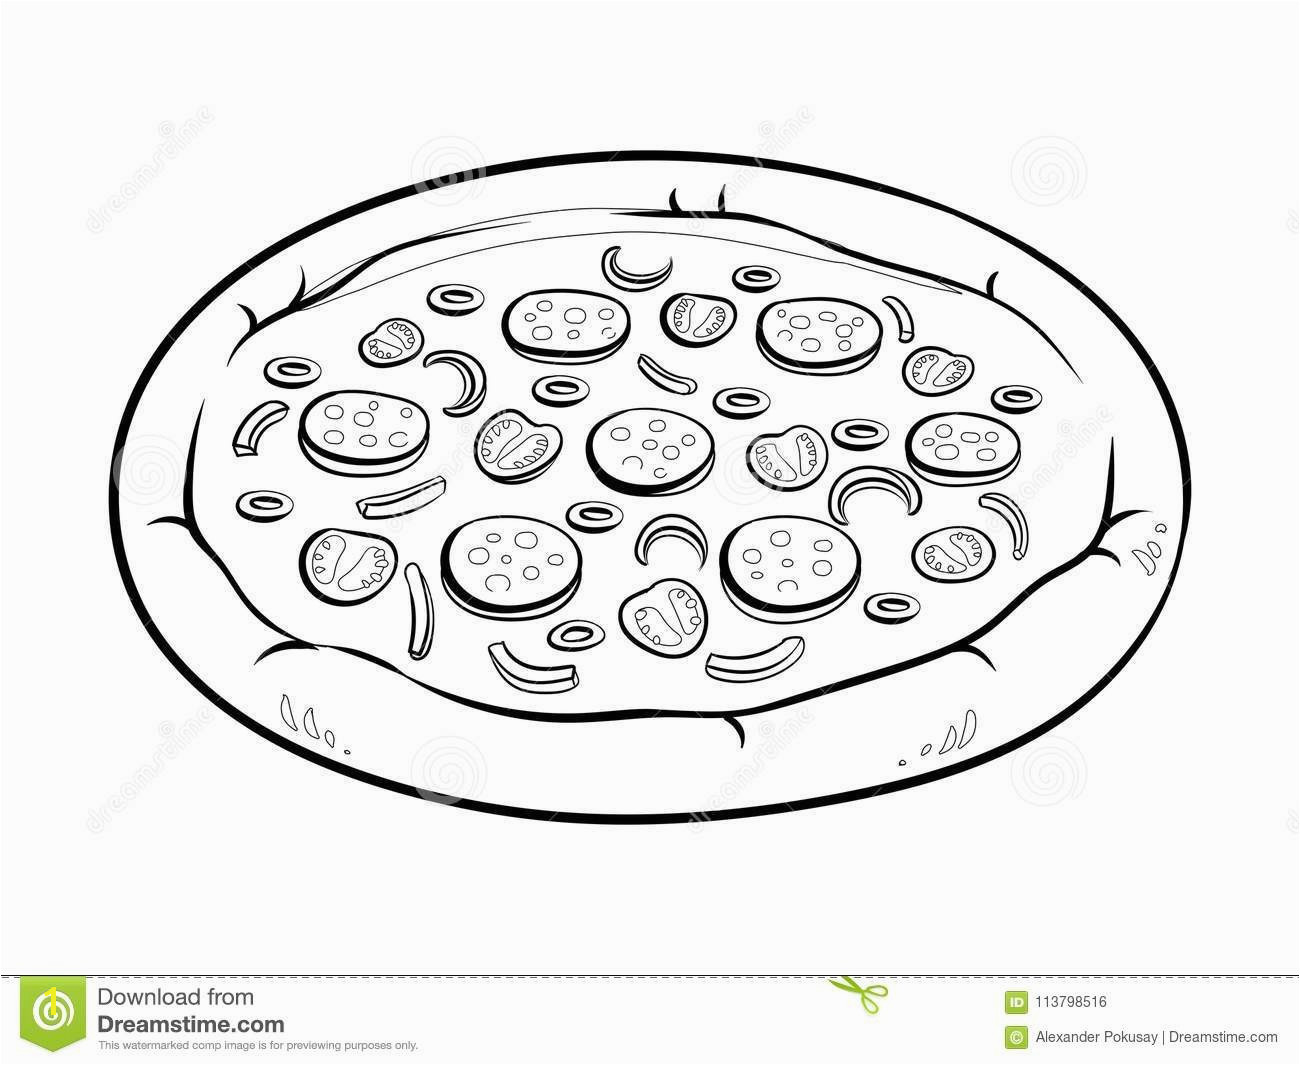 Make A Pizza Coloring Page Lovely Round Pizza Coloring Book Vector Illustration Stock Vector 14